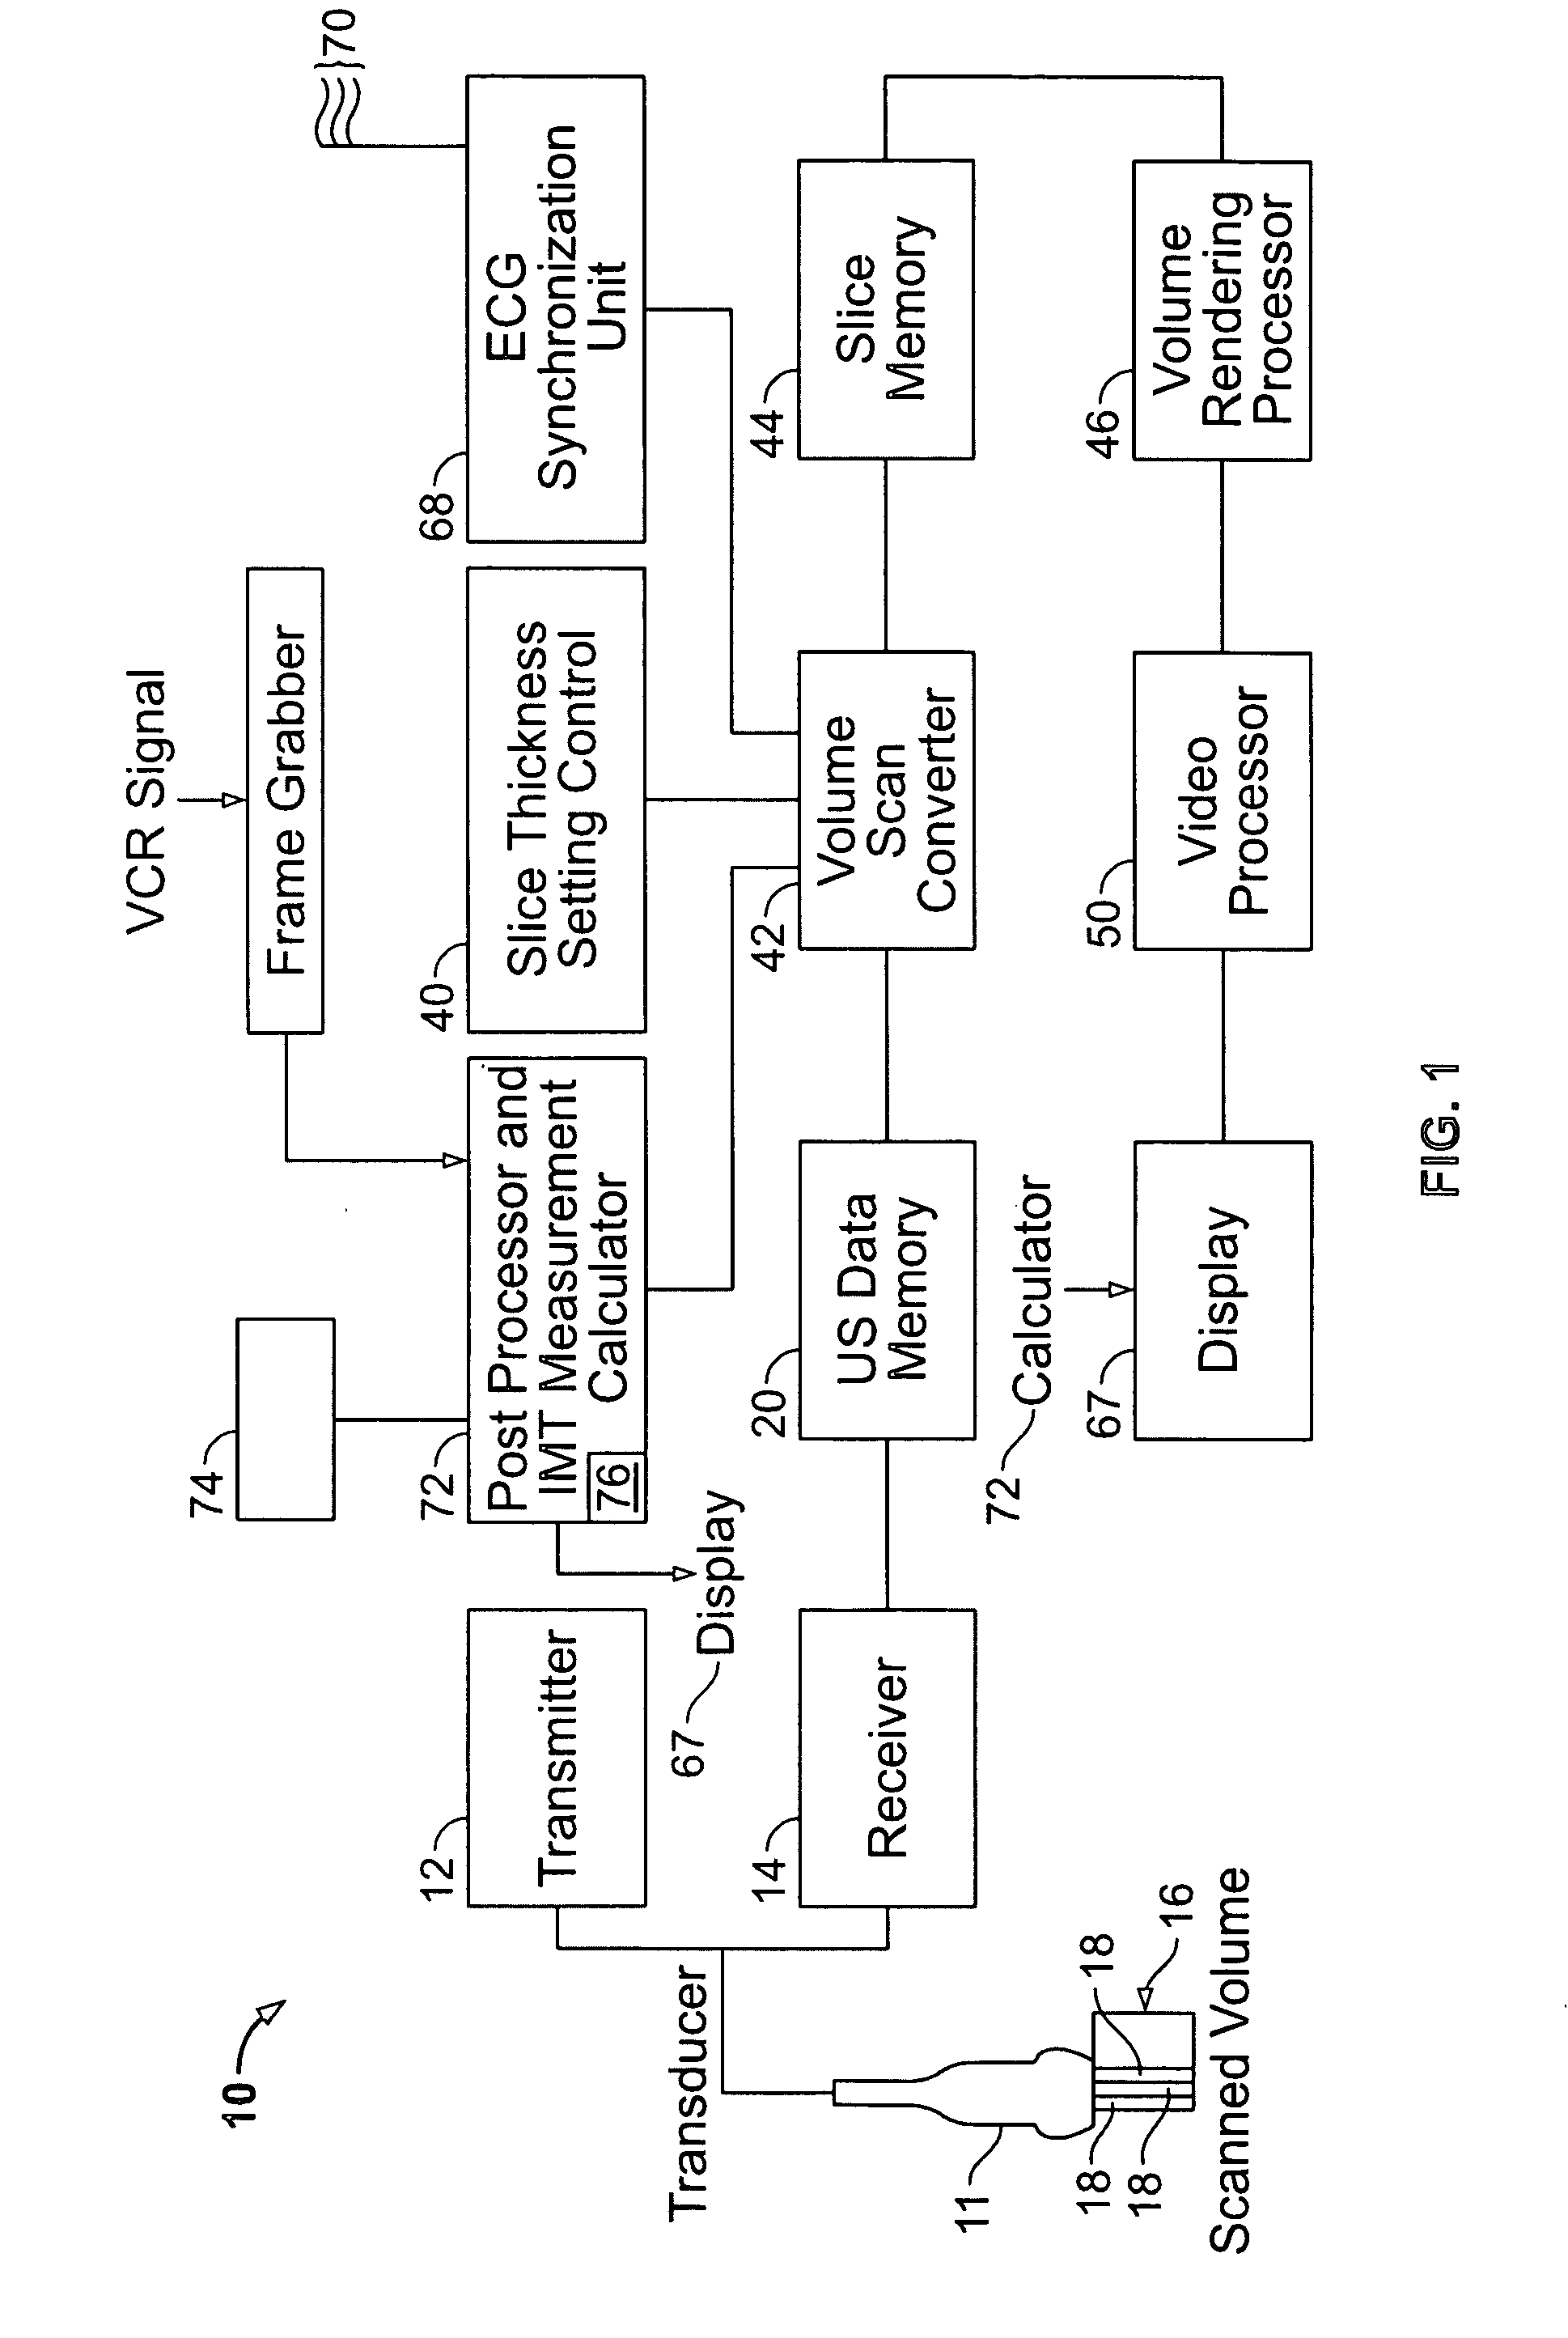 Method and apparatus for measuring anatomic structures